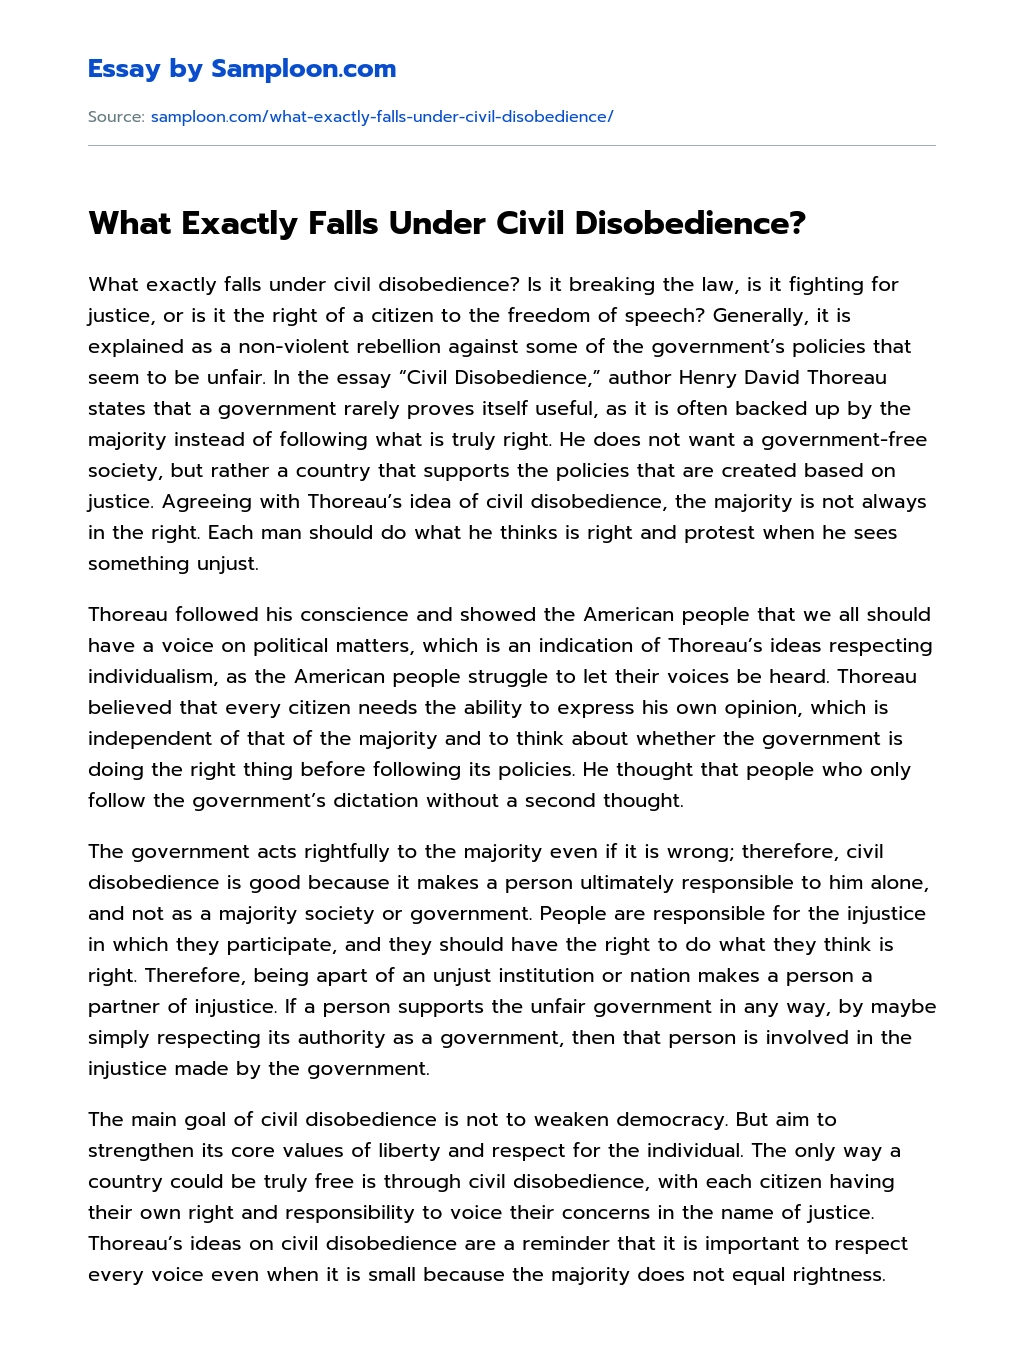 What Exactly Falls Under Civil Disobedience? essay